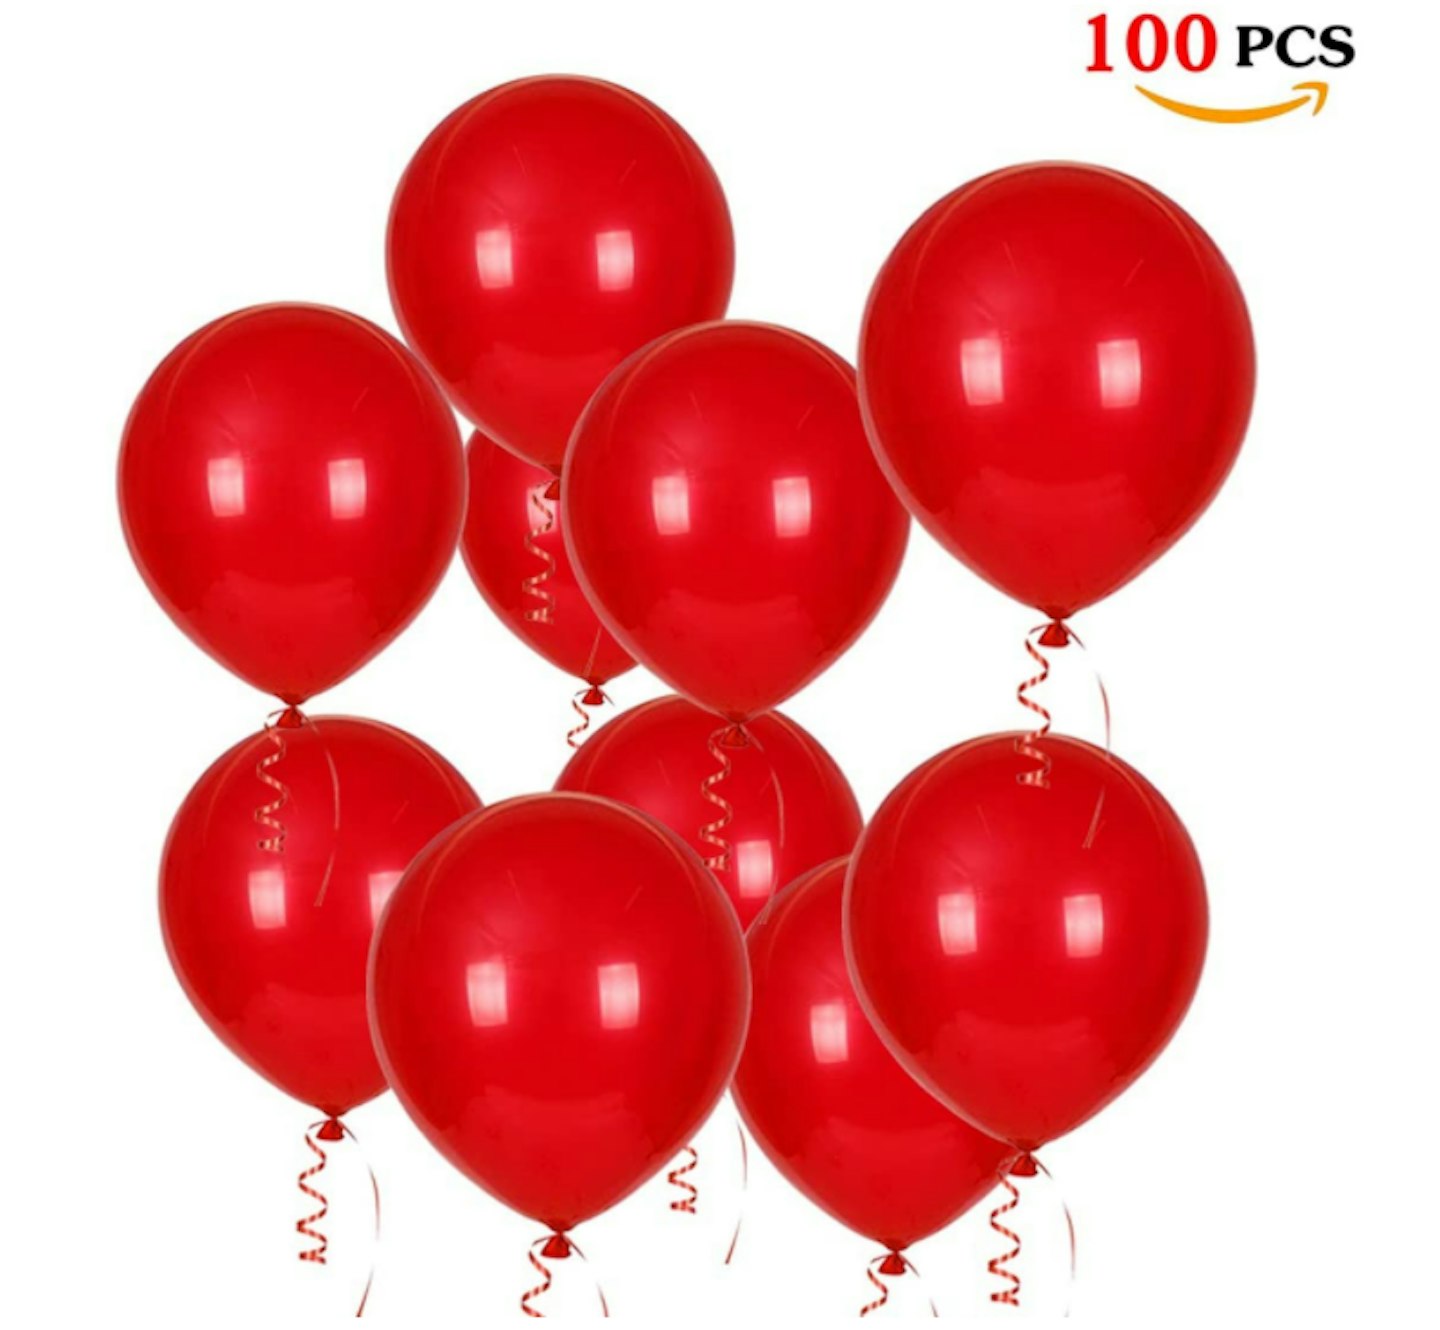 O-Kinee Red Balloons,100 Pieces